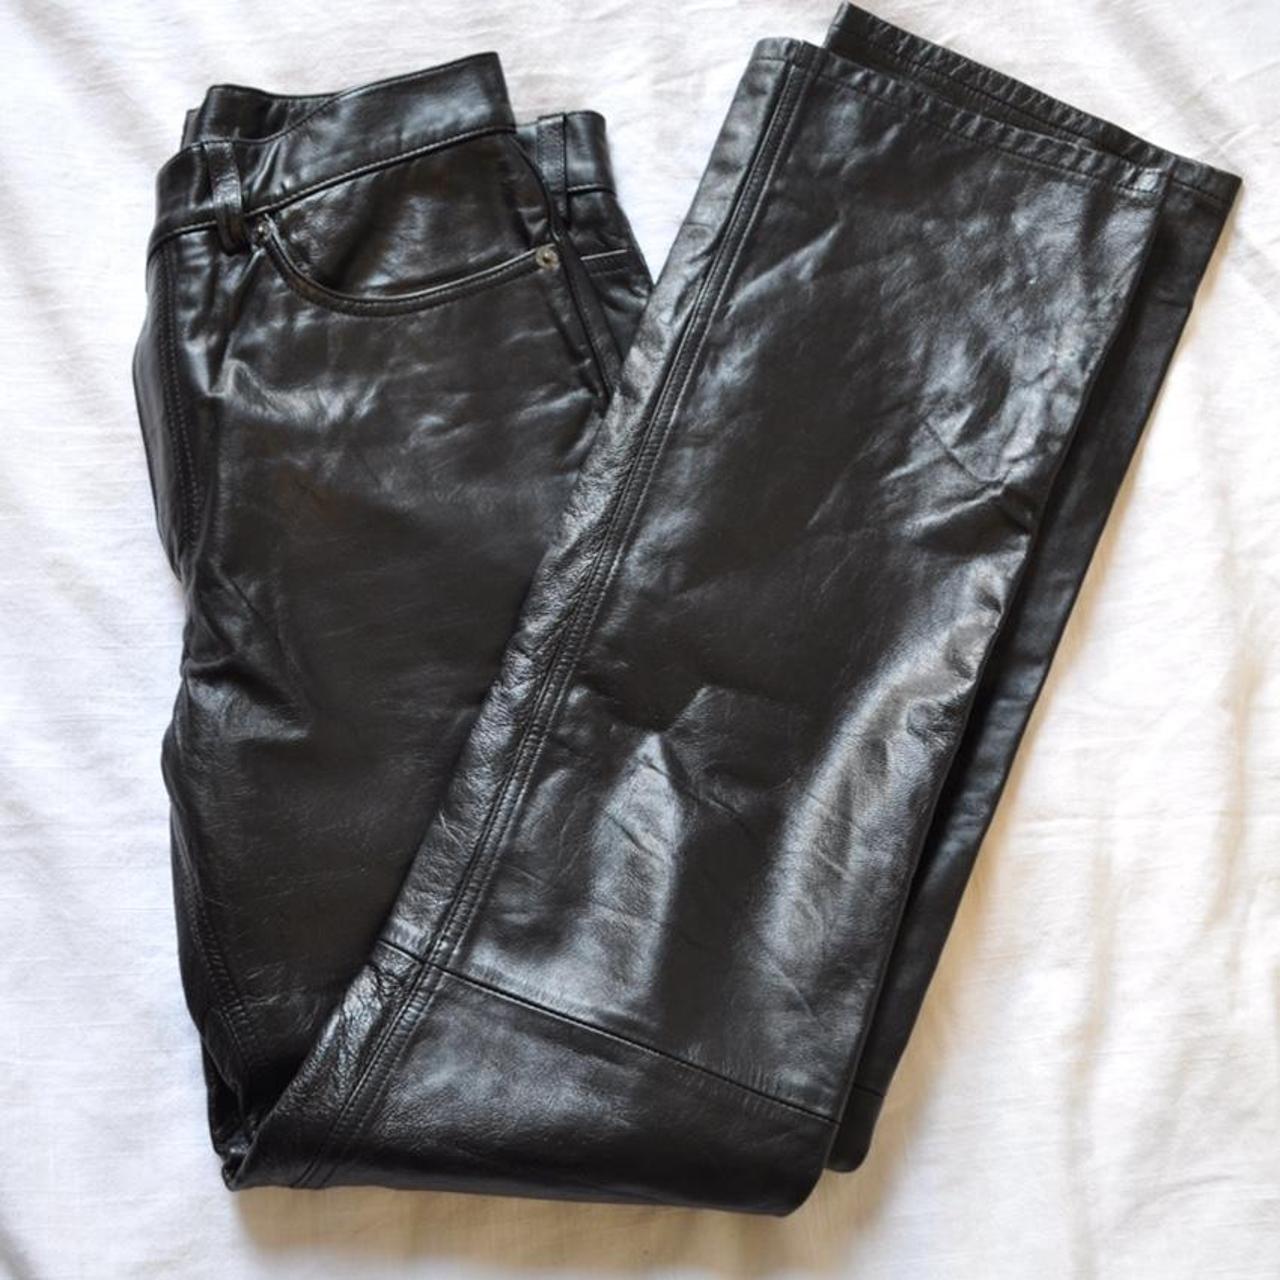 PERFECT POLO RALPH LAUREN LEATHER PANTS 🐜 These are... - Depop